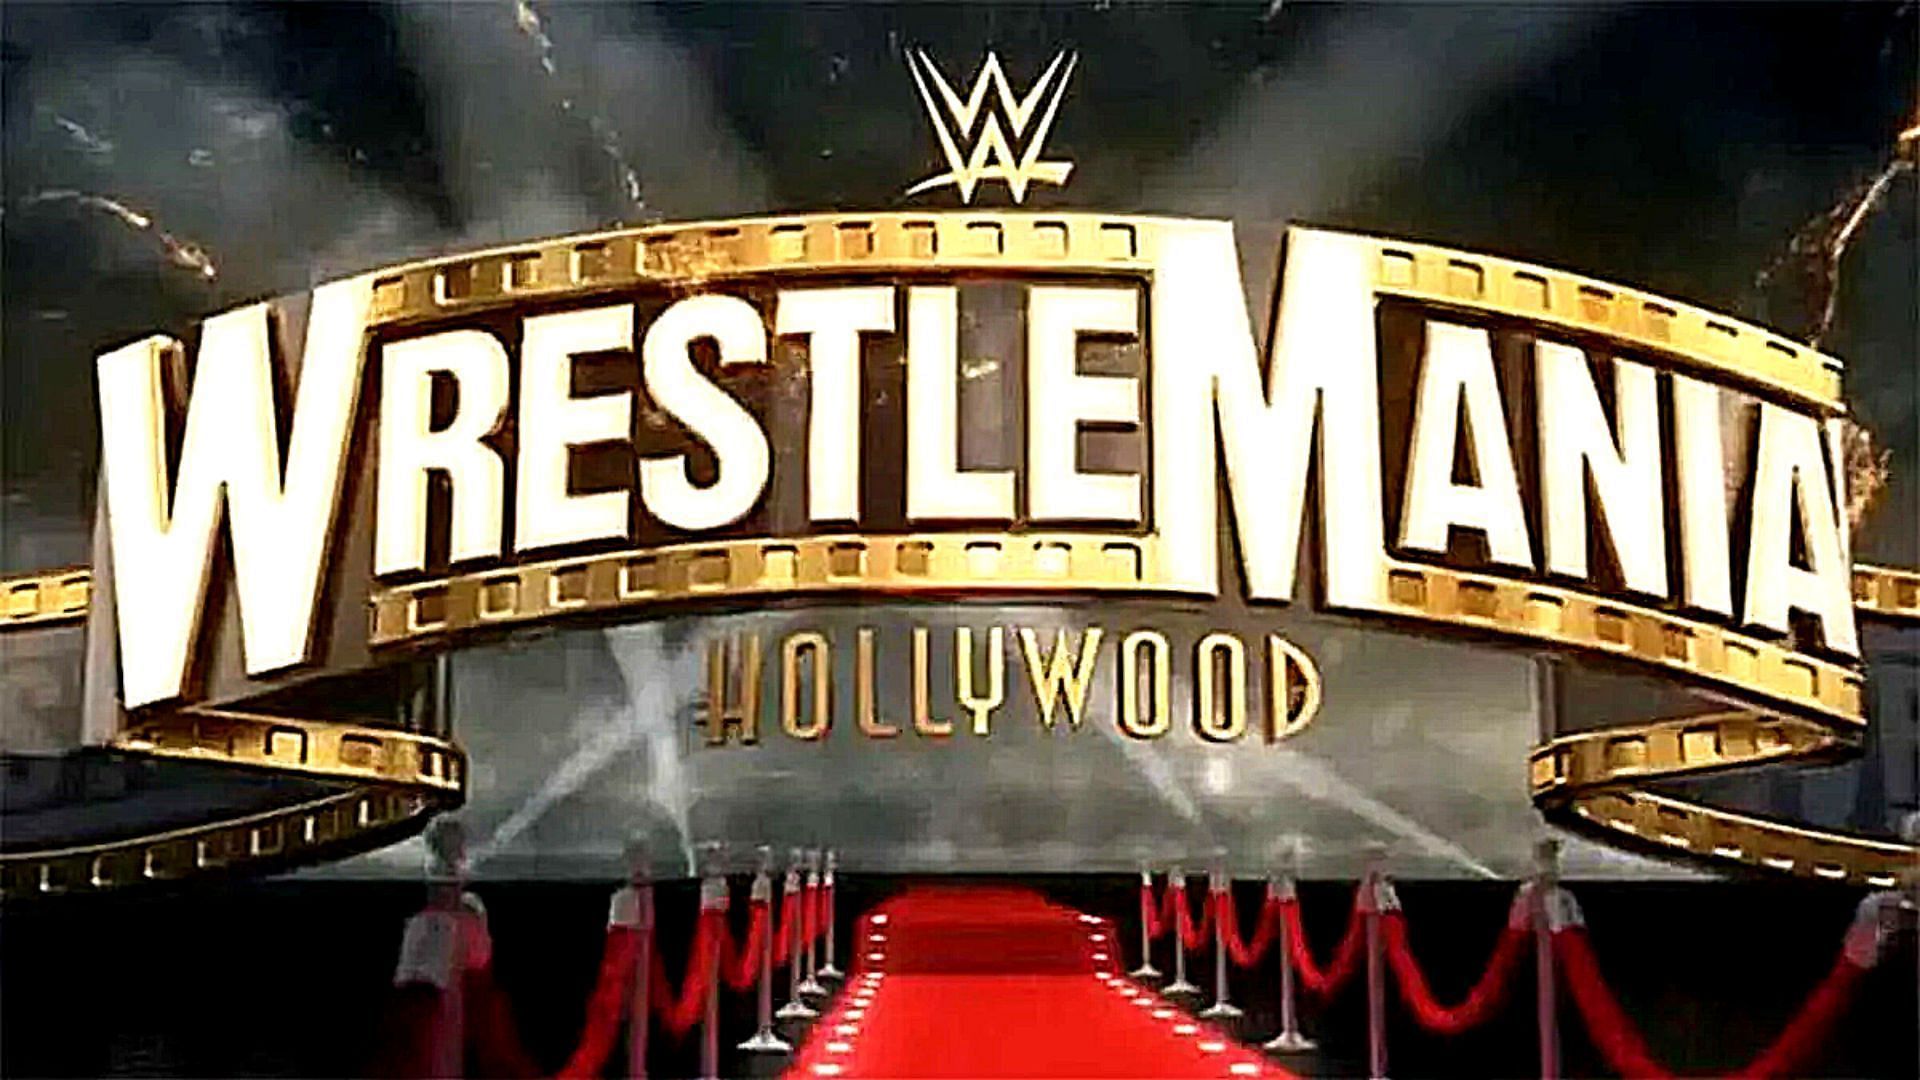 WrestleMania Goes Hollywood on April 1 and 2 at SoFi Stadium in Los Angeles, California.